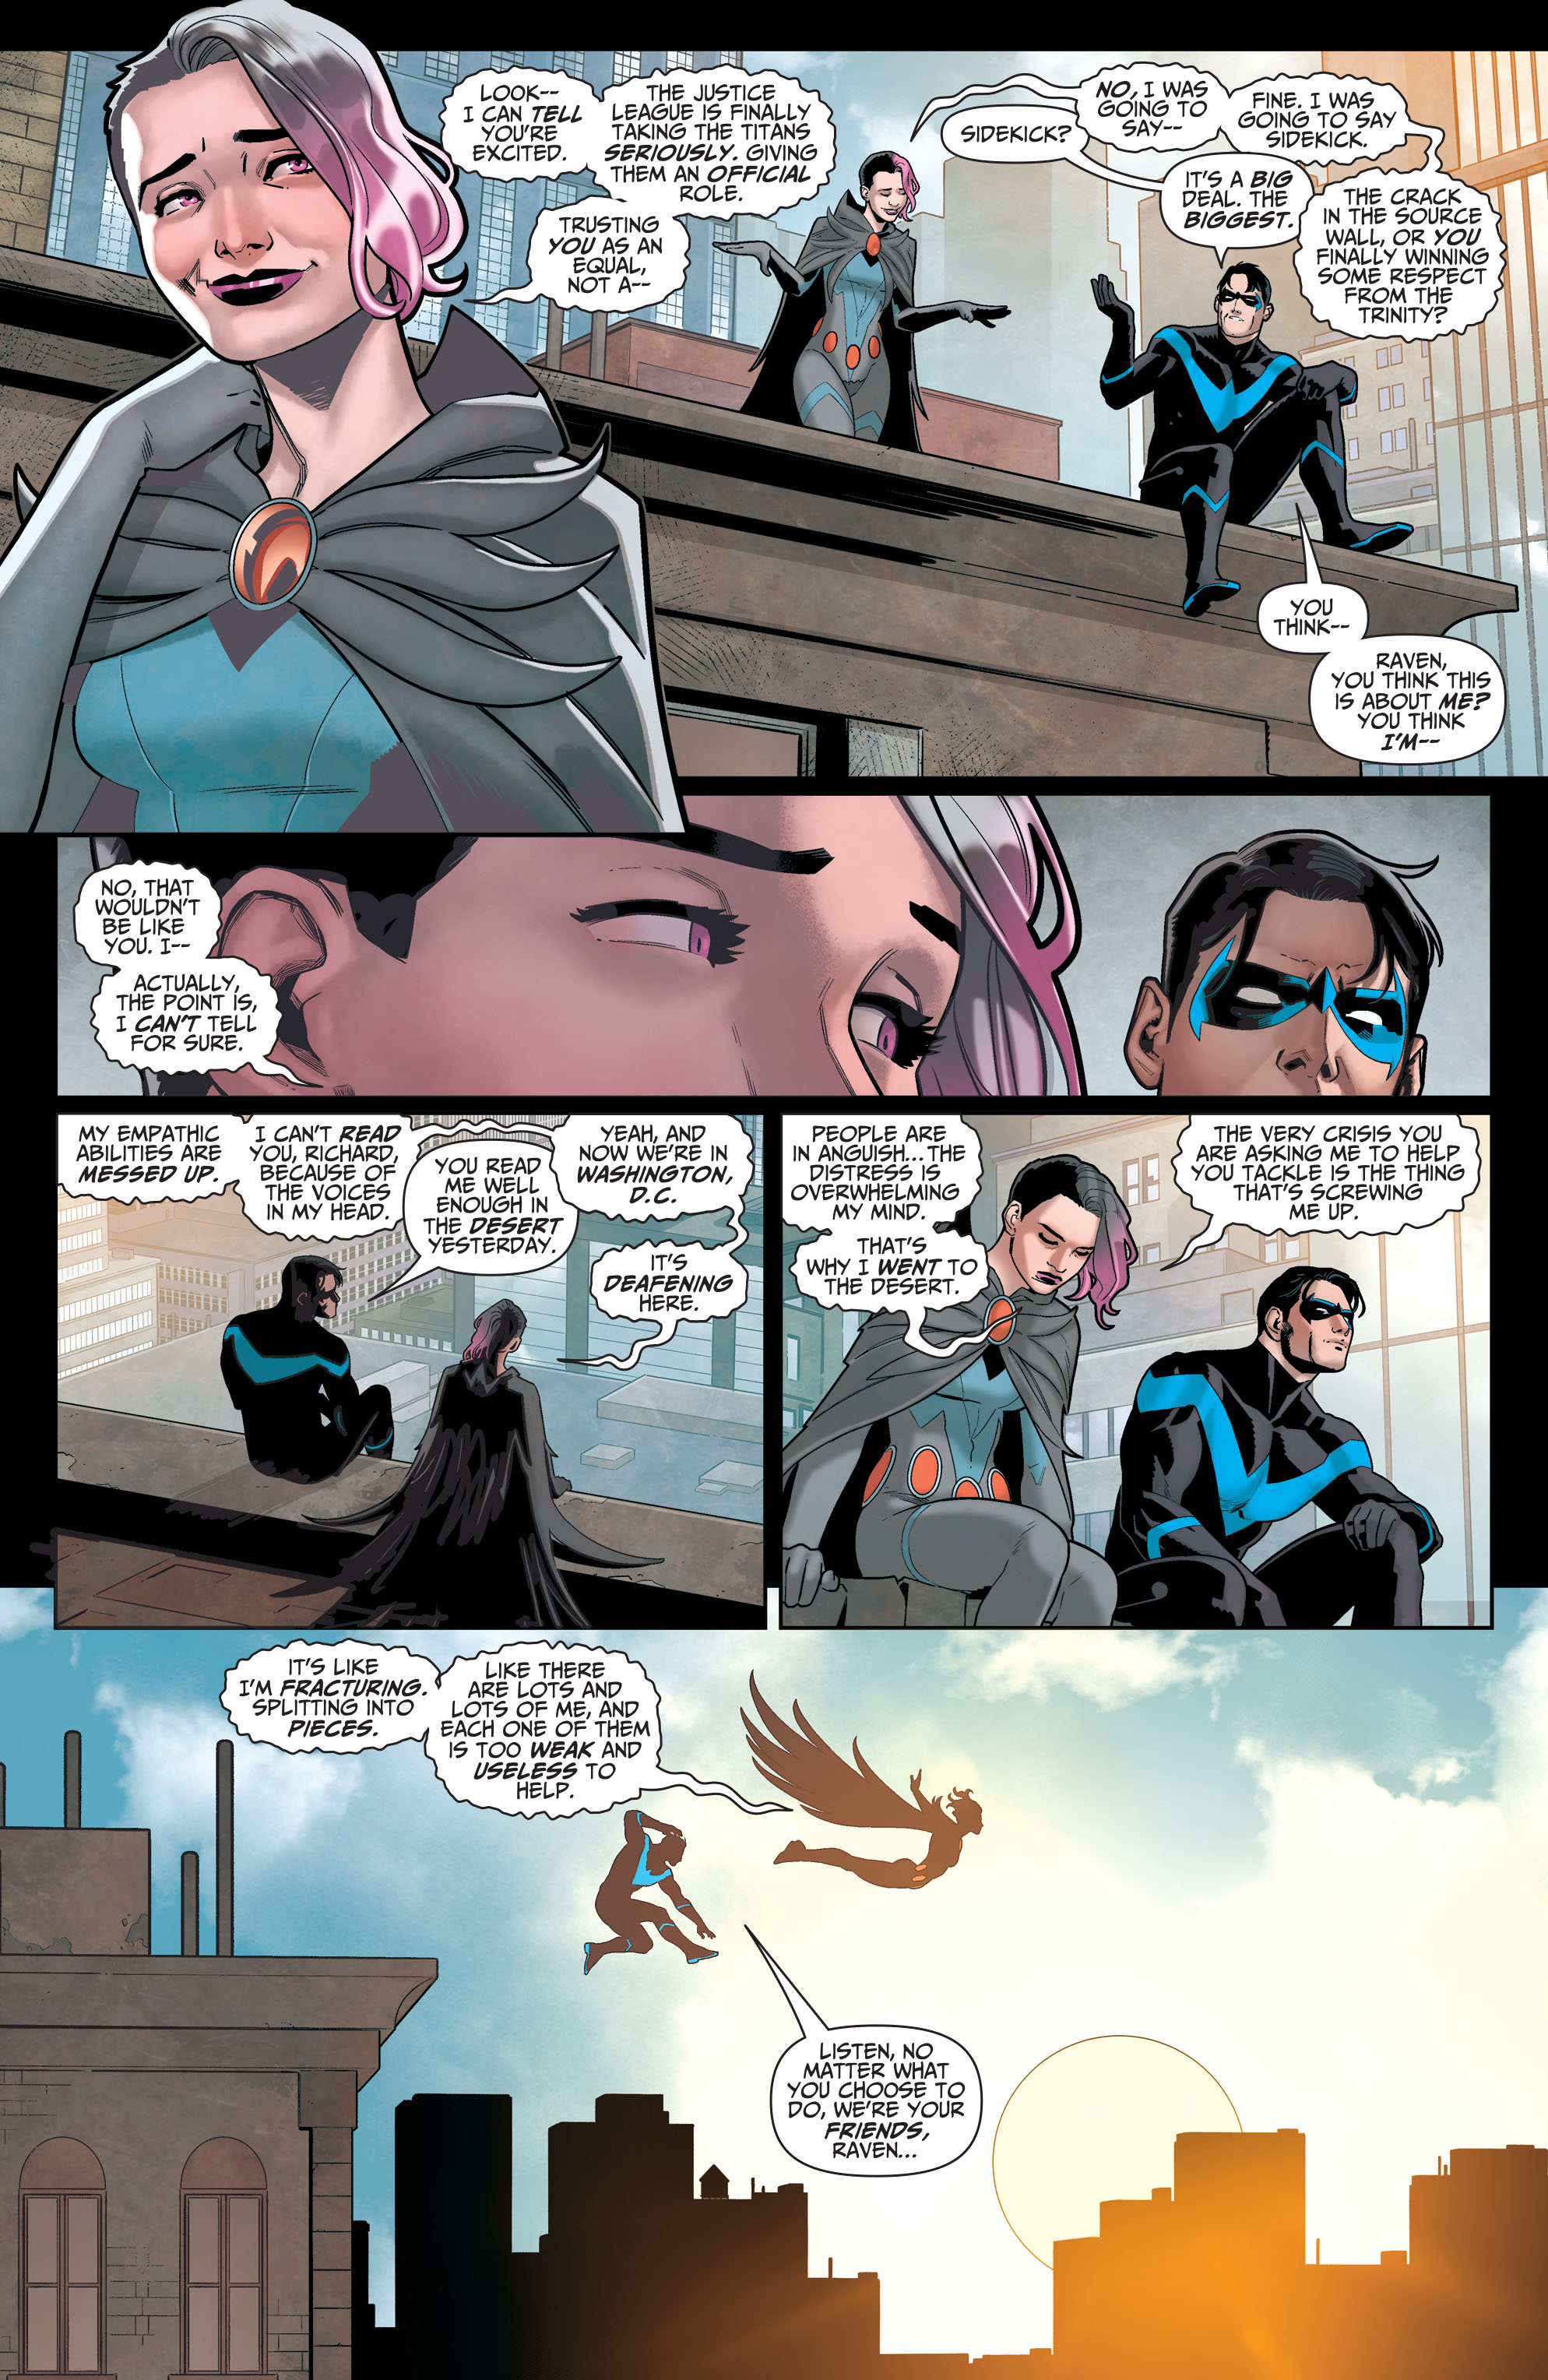 Titans (2016-): Chapter 36 - Page 4